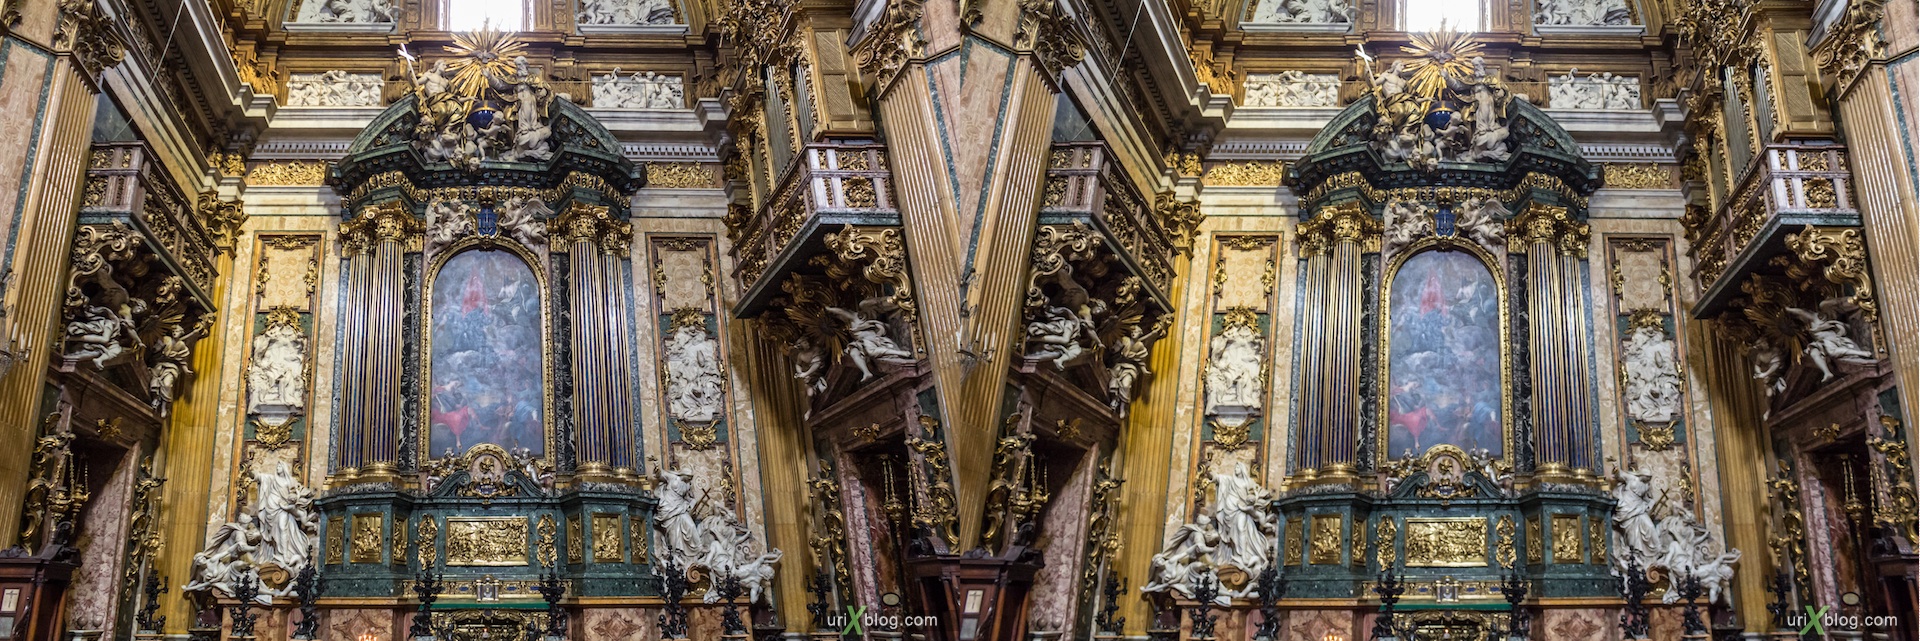 2012, church of the Gesù, Rome, Italy, cathedral, monastery, Christianity, Catholicism, 3D, stereo pair, cross-eyed, crossview, cross view stereo pair